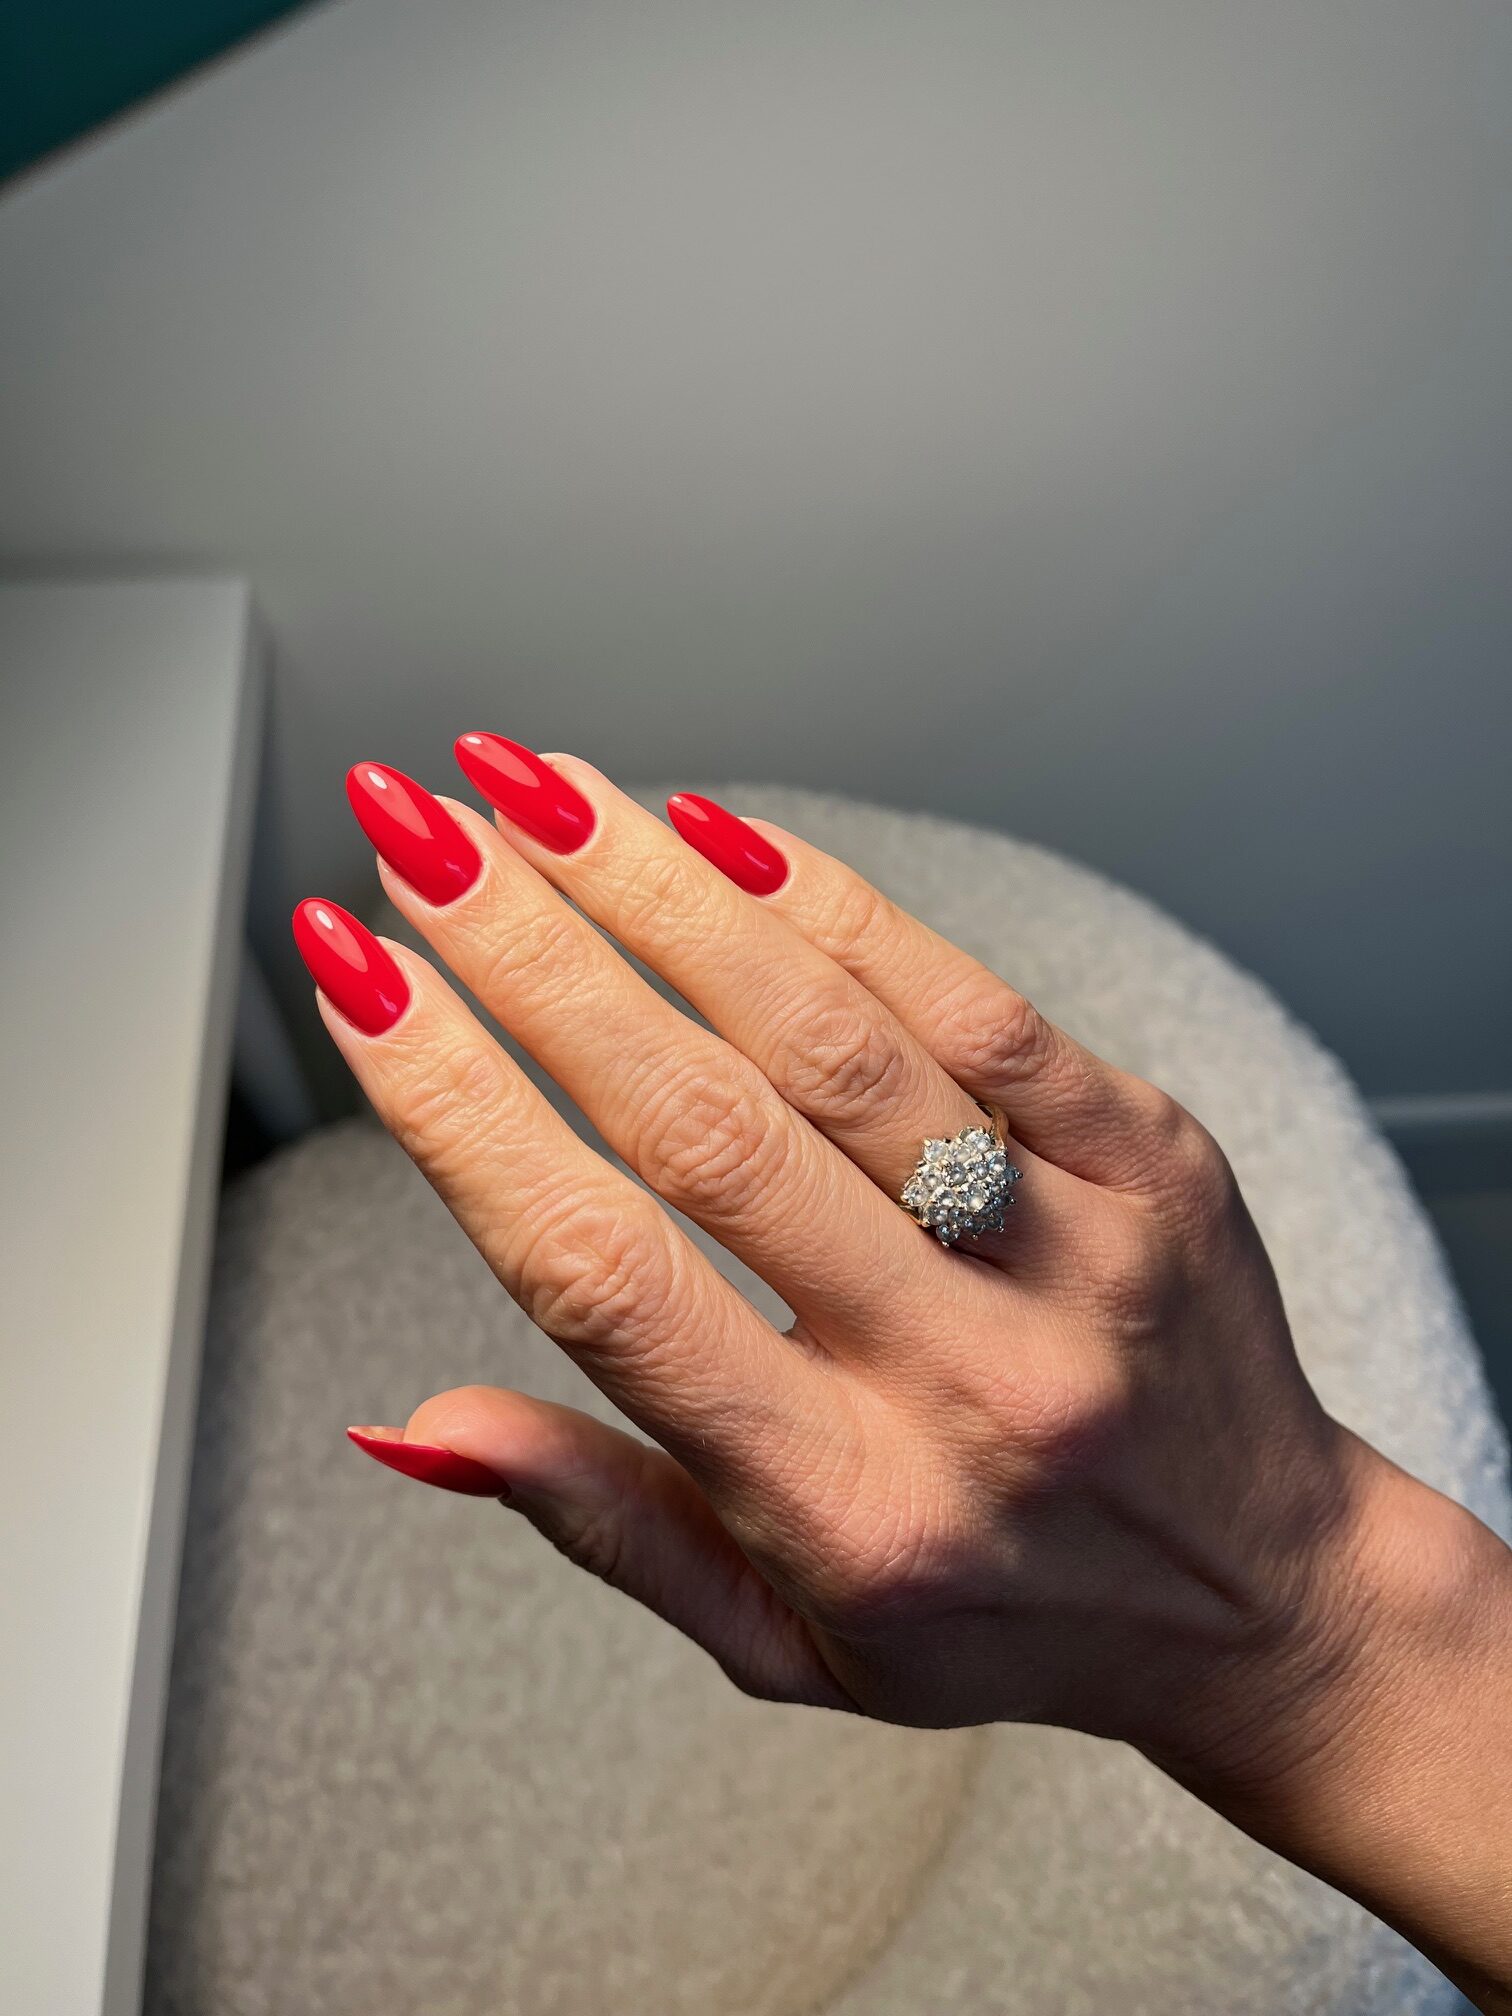 Long nails, luxury manicure, red nails, almond nails, russian manicure